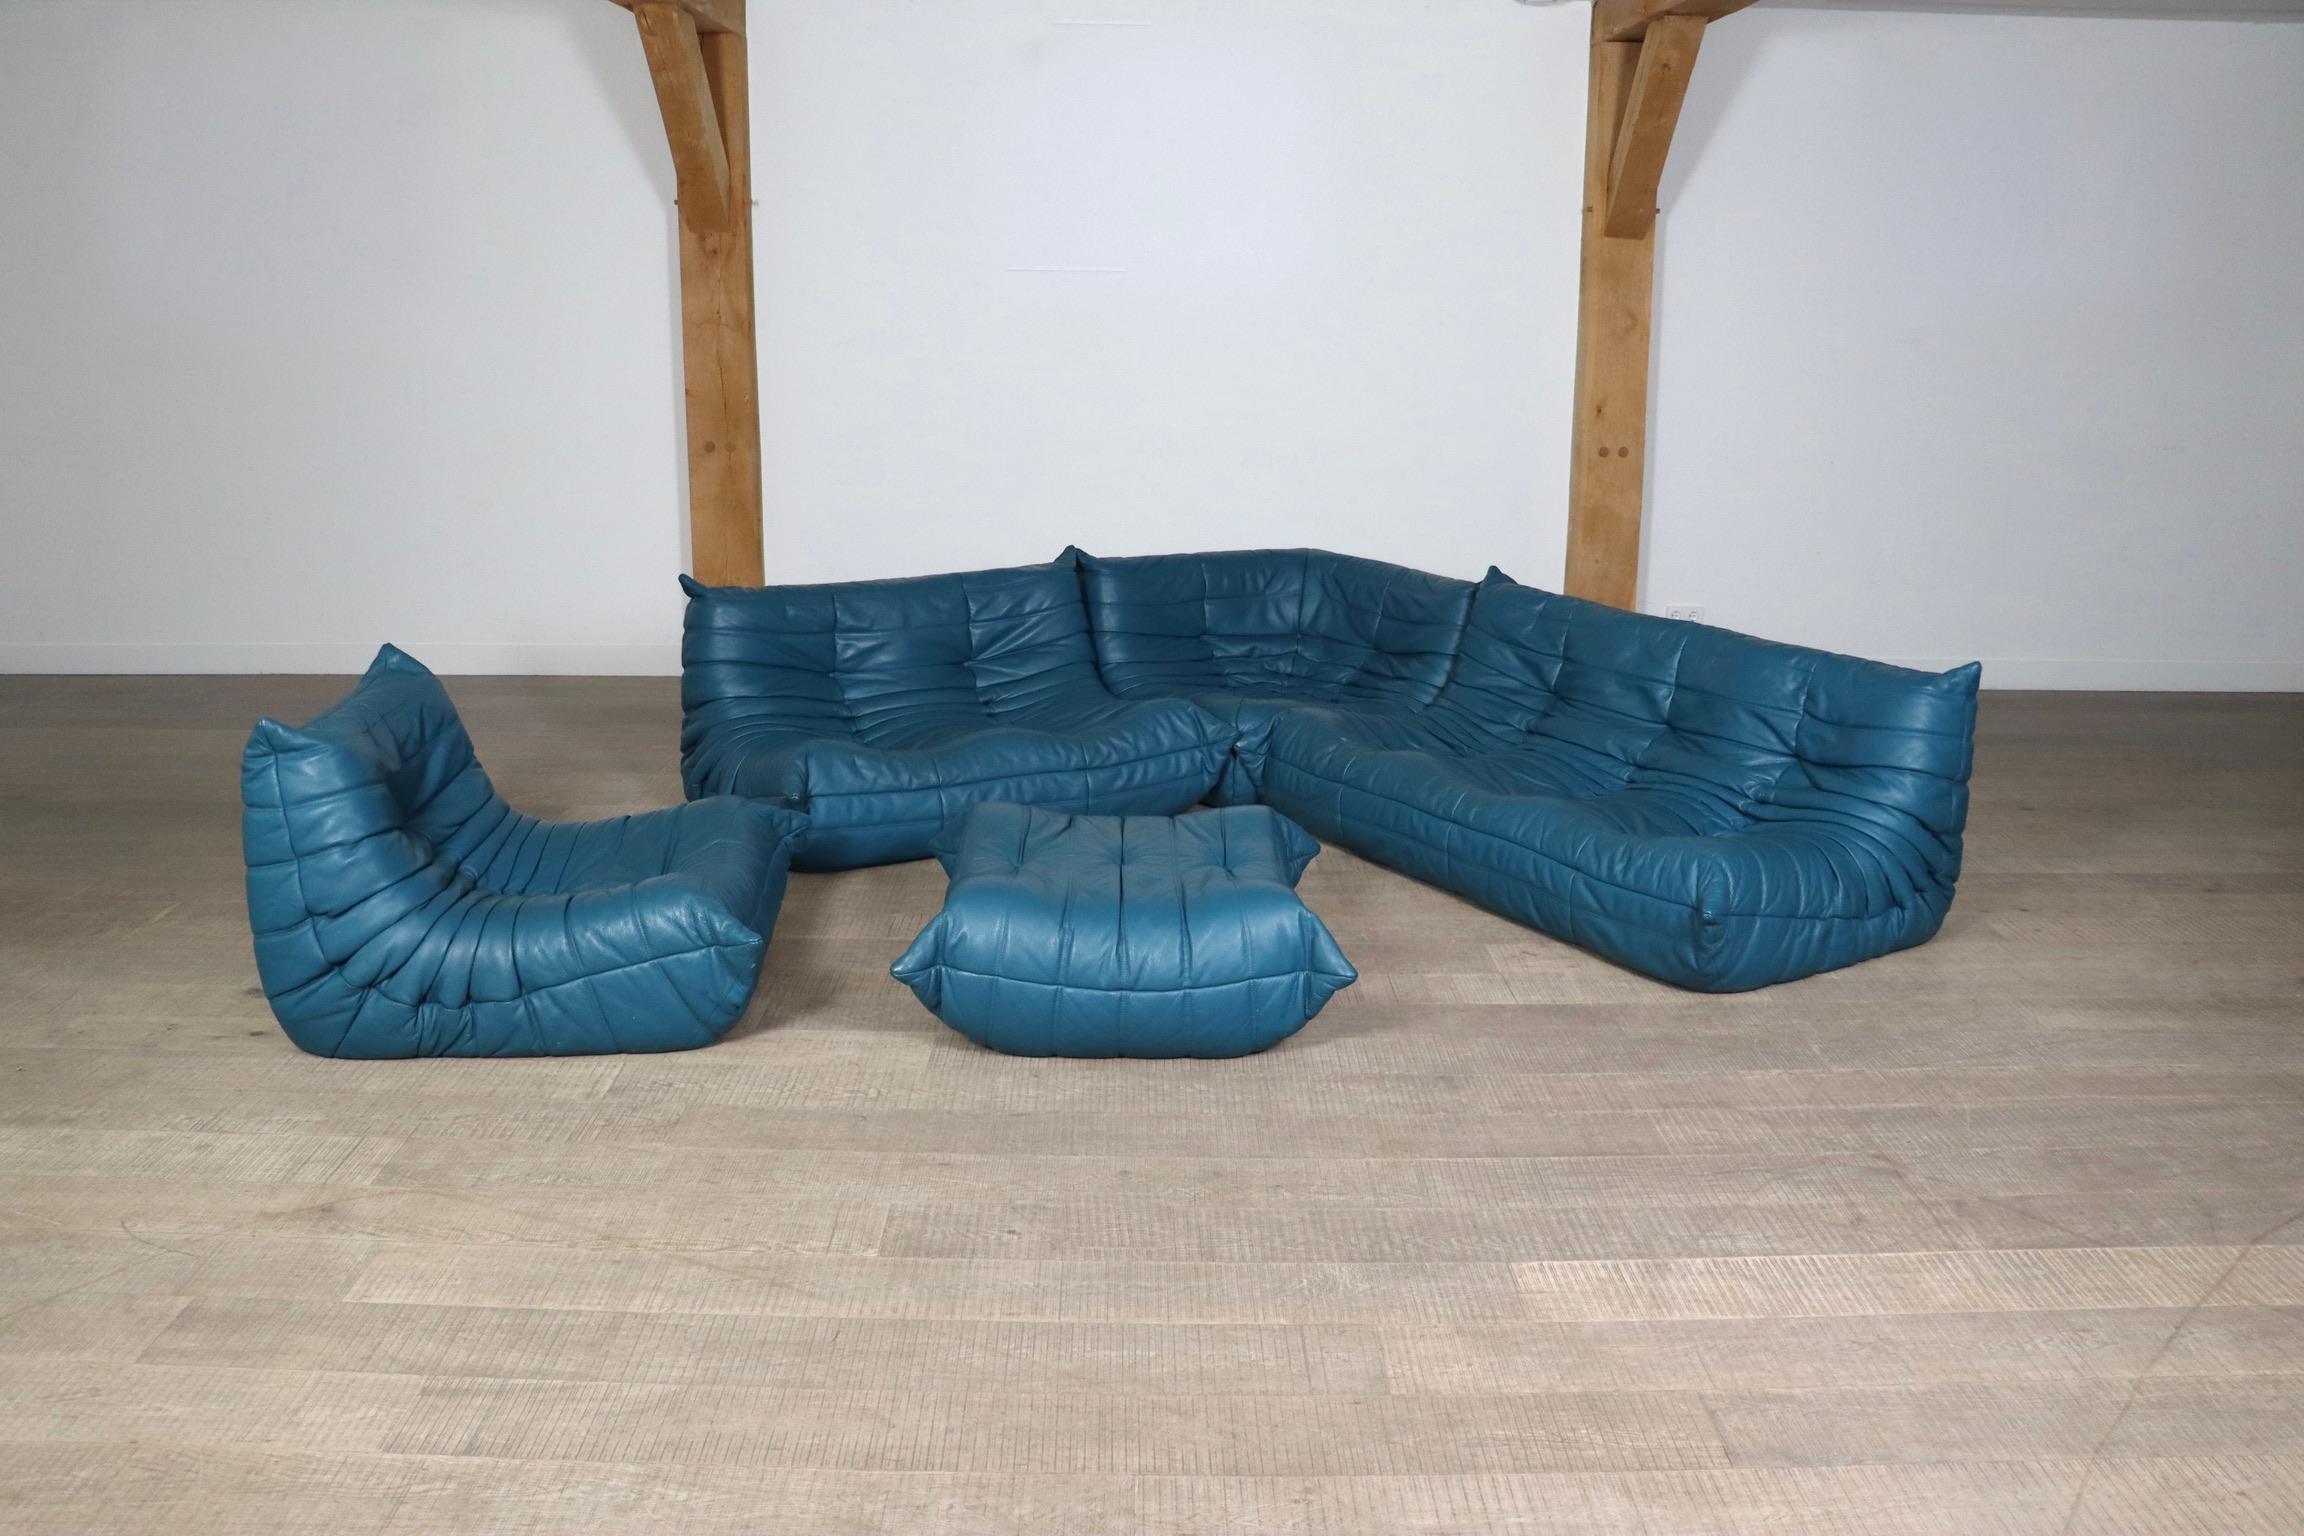 Amazing Ligne Roset Togo sofa set in original Petrol blue leather by Michel Ducaroy, 1970s. This iconic design has become more and more popular over the years. The lightweight design combined with fun colors and materials make these seating elements